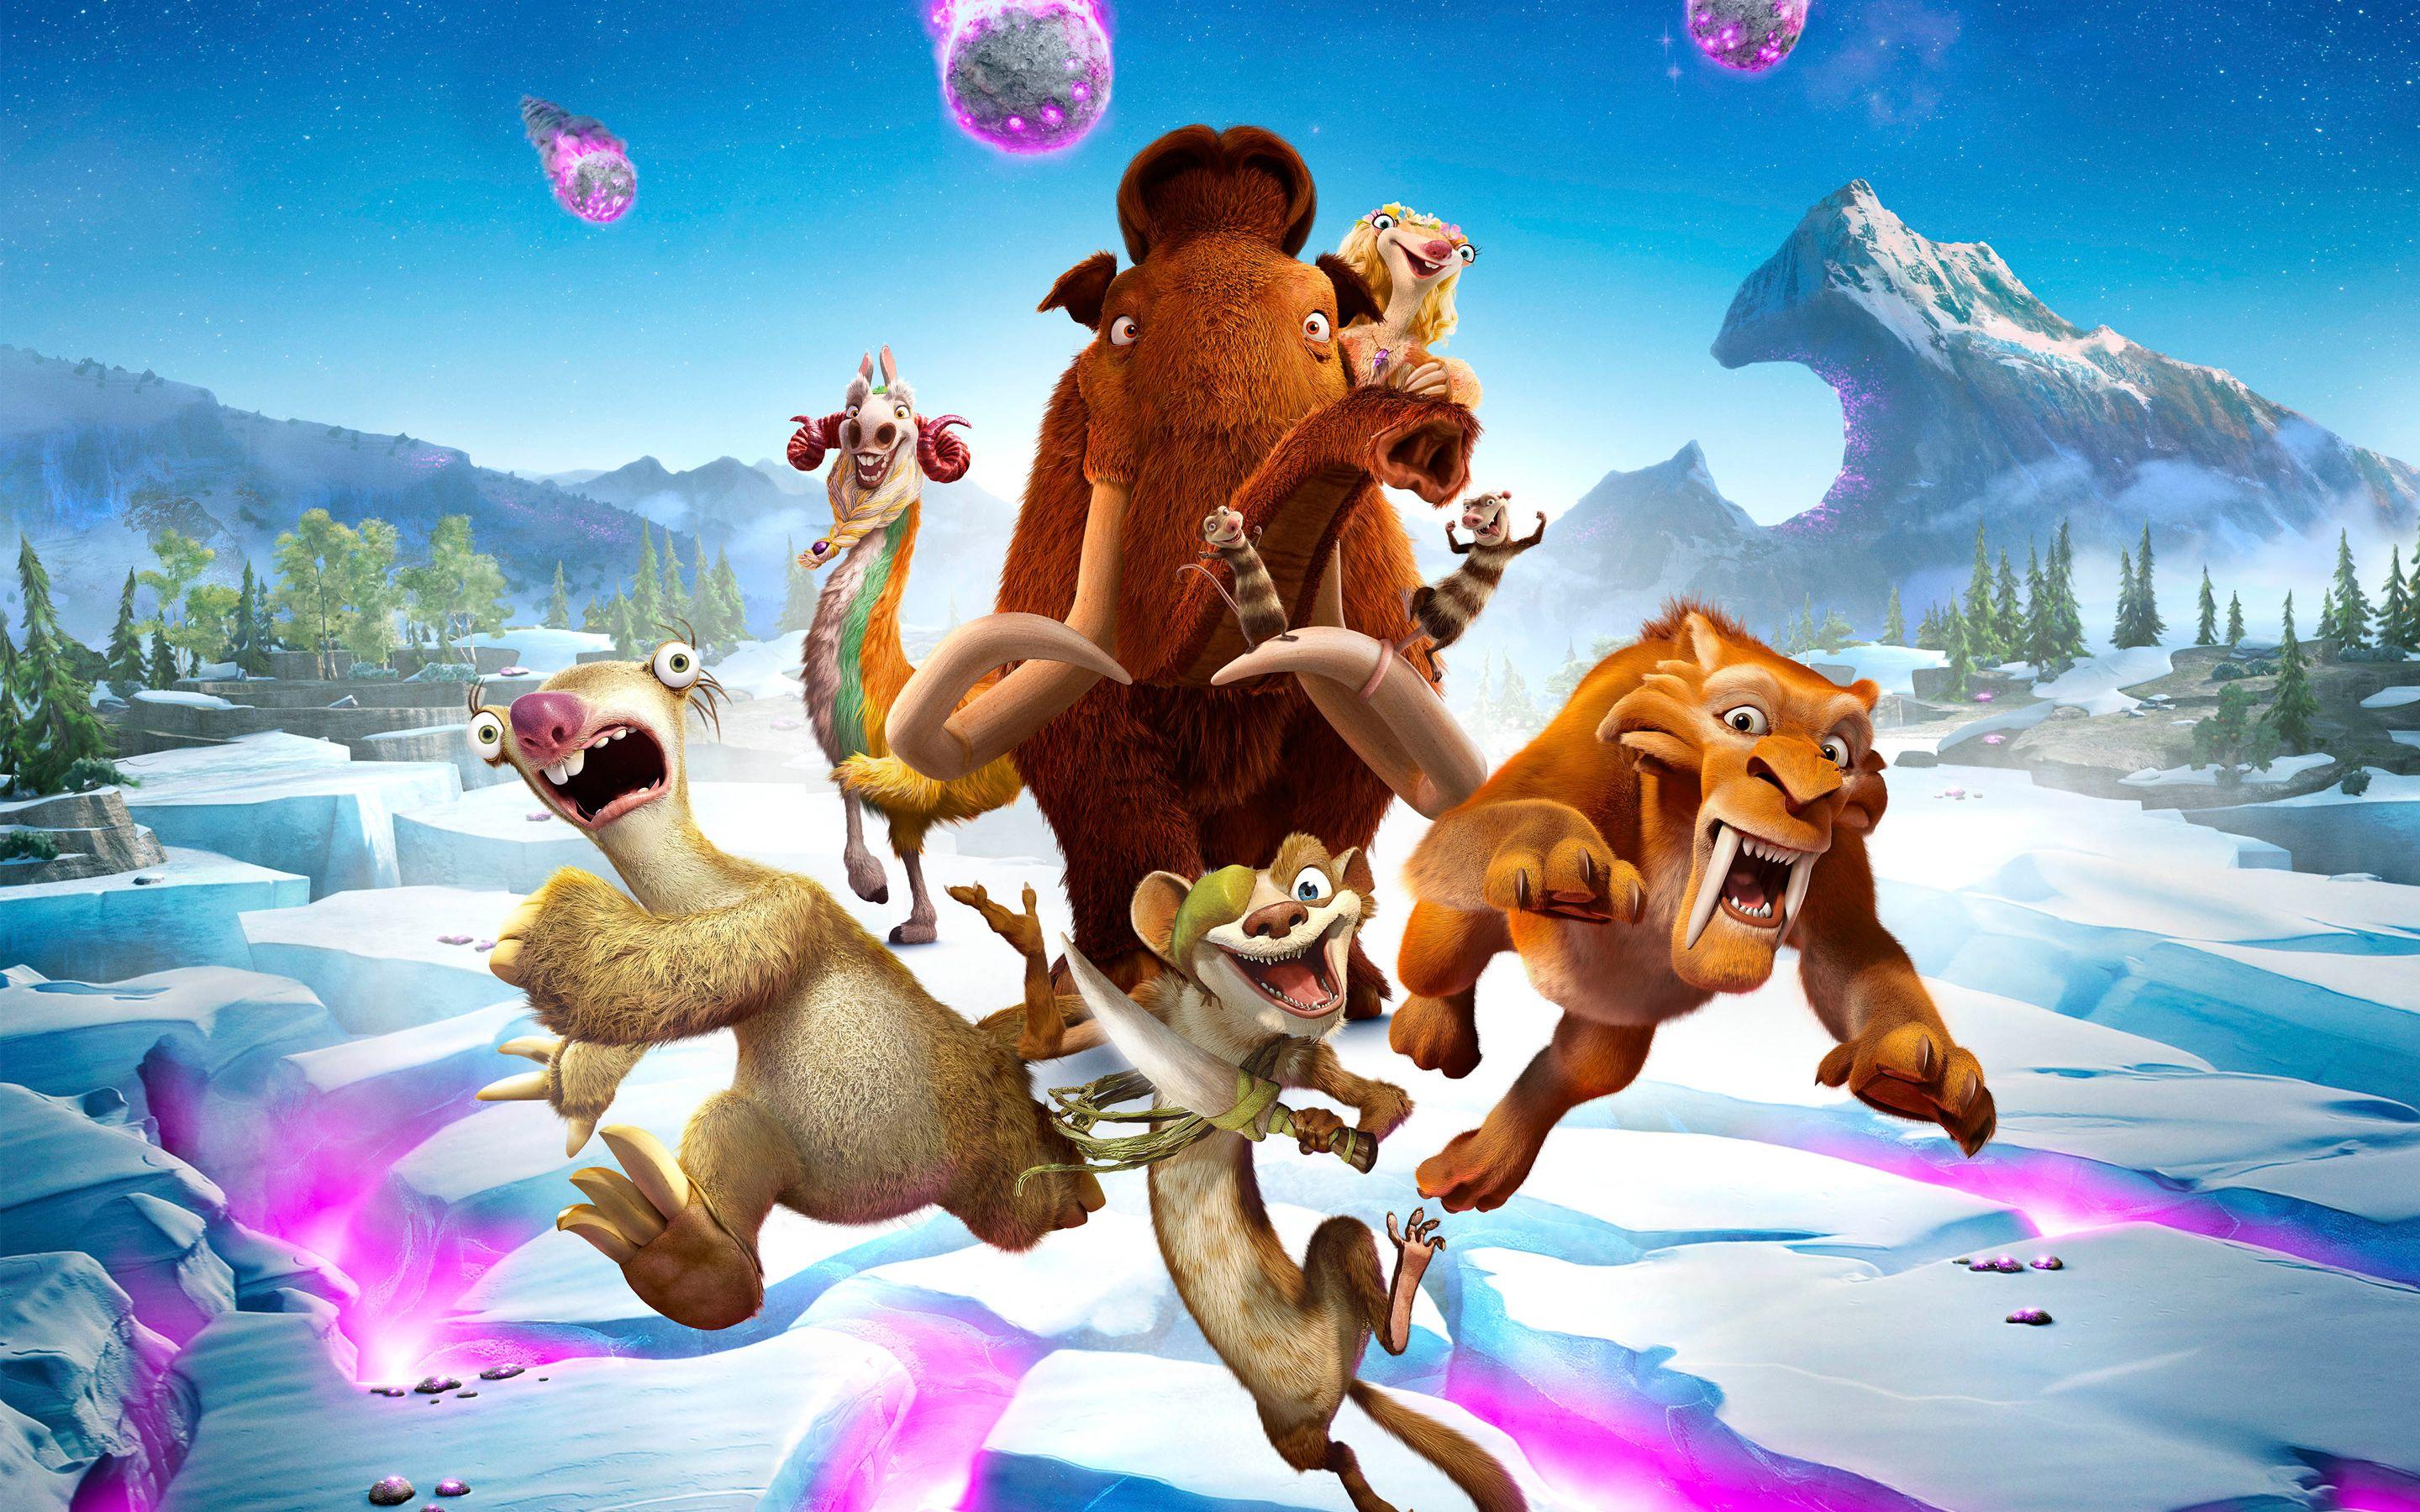 Movies Ice Age Collision Course wallpaper Desktop, Phone, Tablet